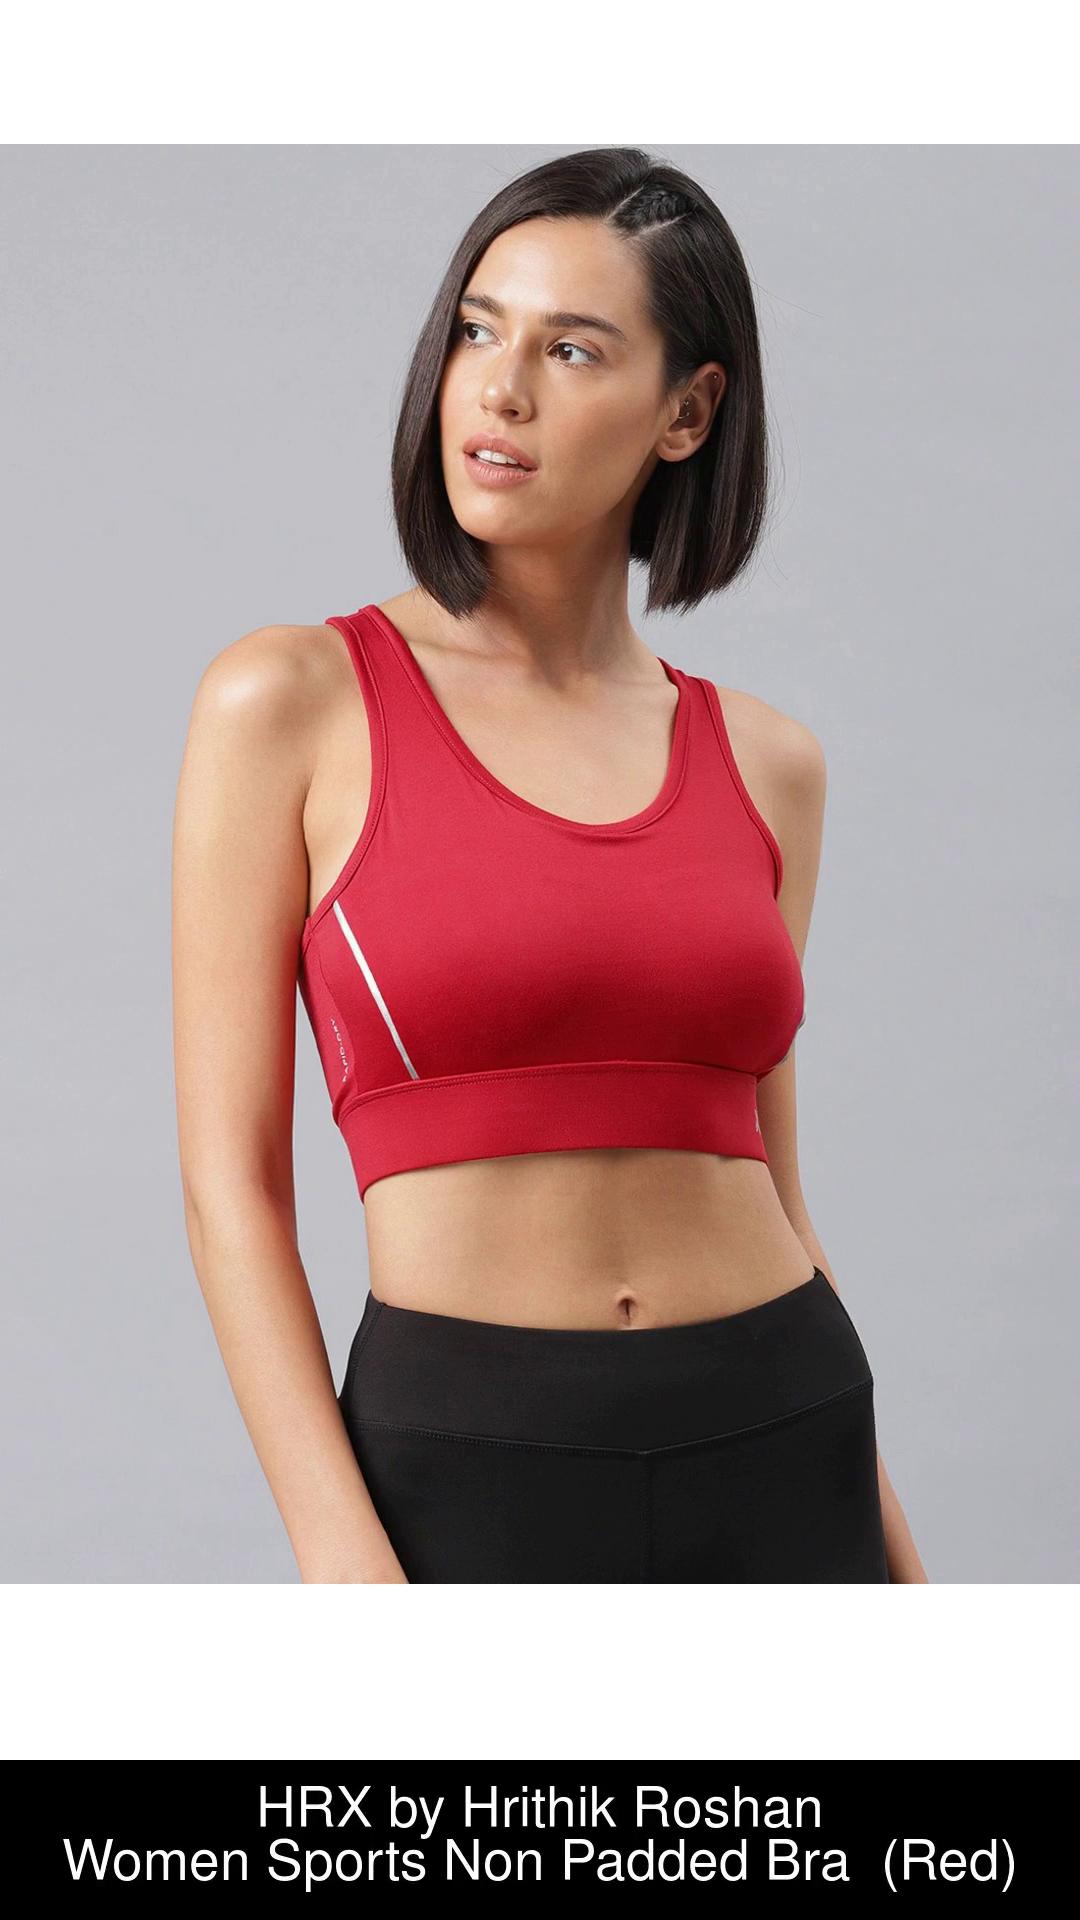 HRX by Hrithik Roshan Women Sports Non Padded Bra - Buy HRX by Hrithik  Roshan Women Sports Non Padded Bra Online at Best Prices in India